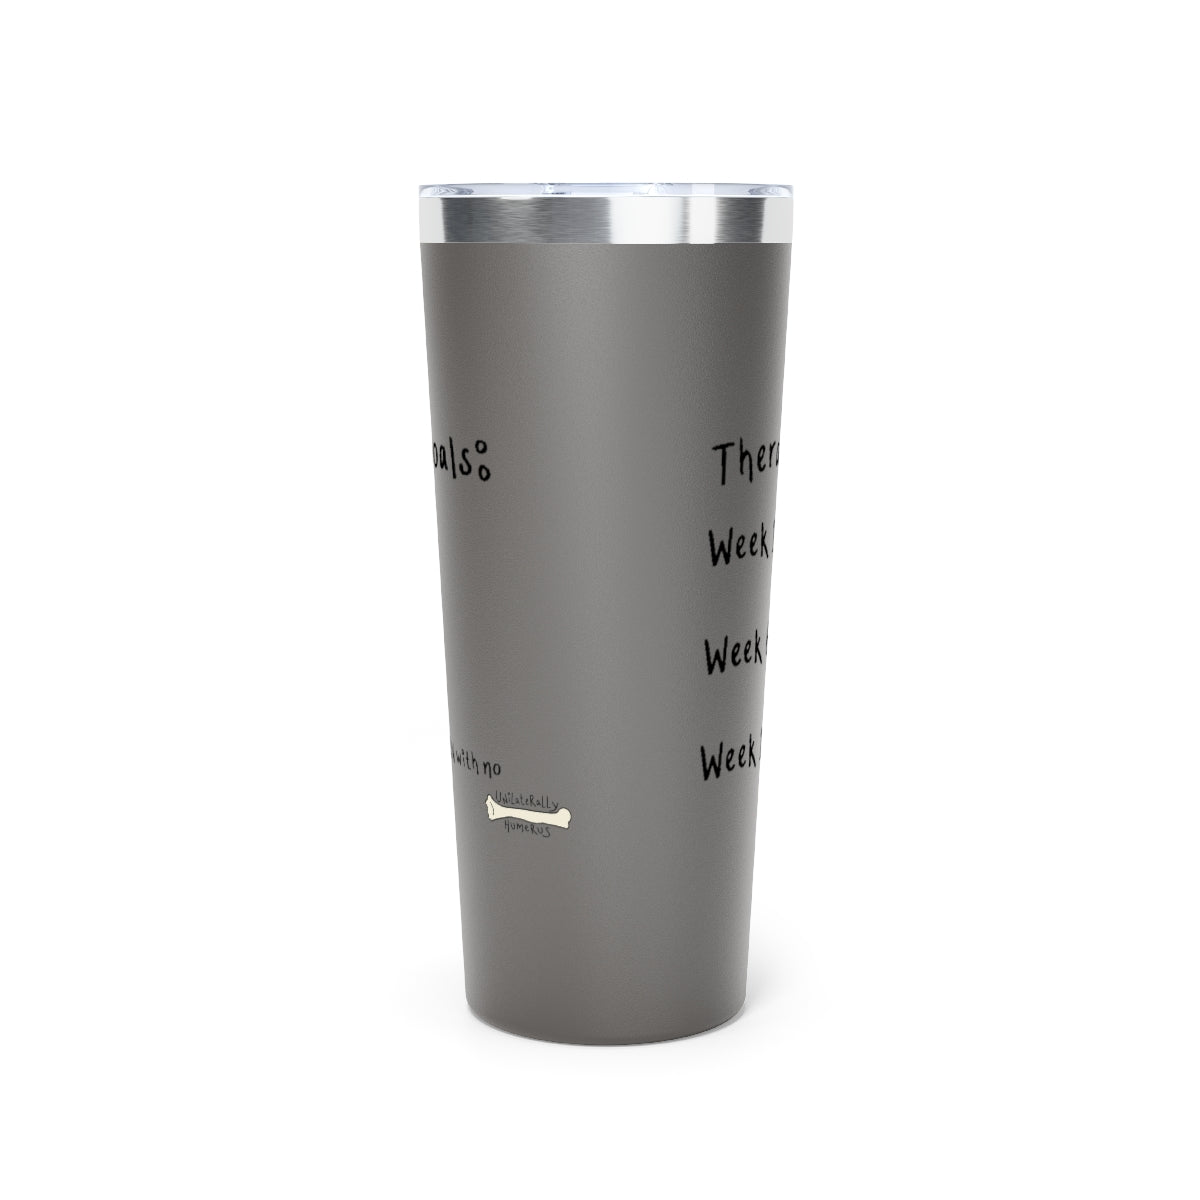 Therapy Student Fieldwork Goals Copper Vacuum Insulated Tumbler, 22oz